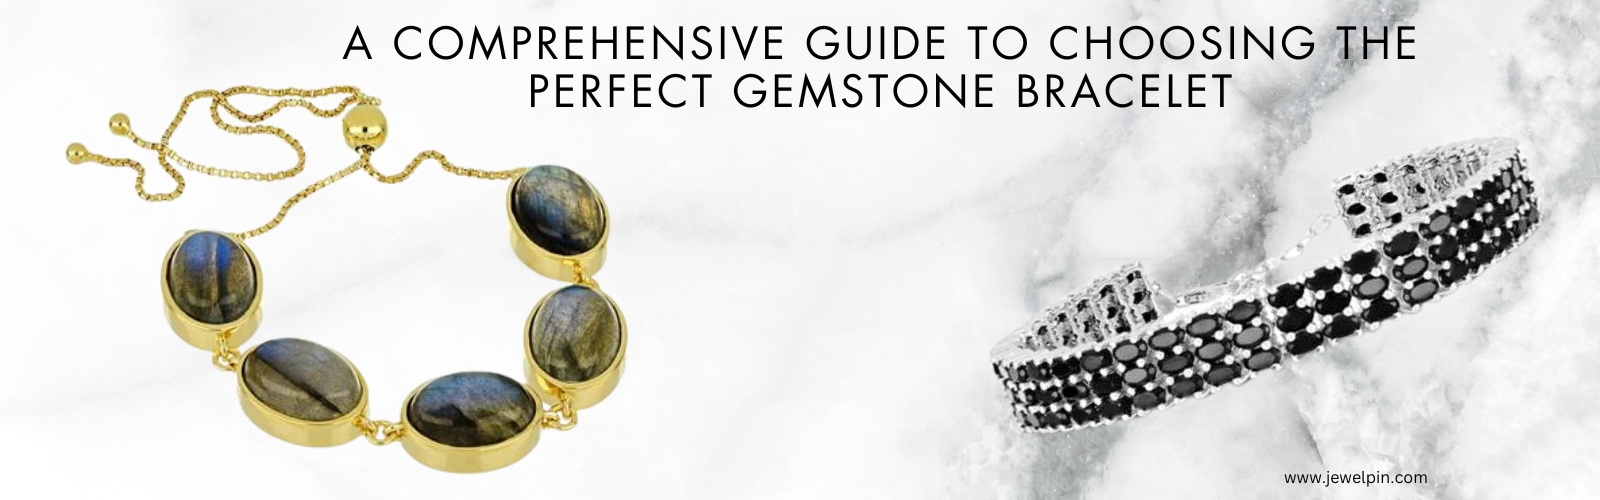 a comprehensive guide to choosing the perfect gemstone bracelet